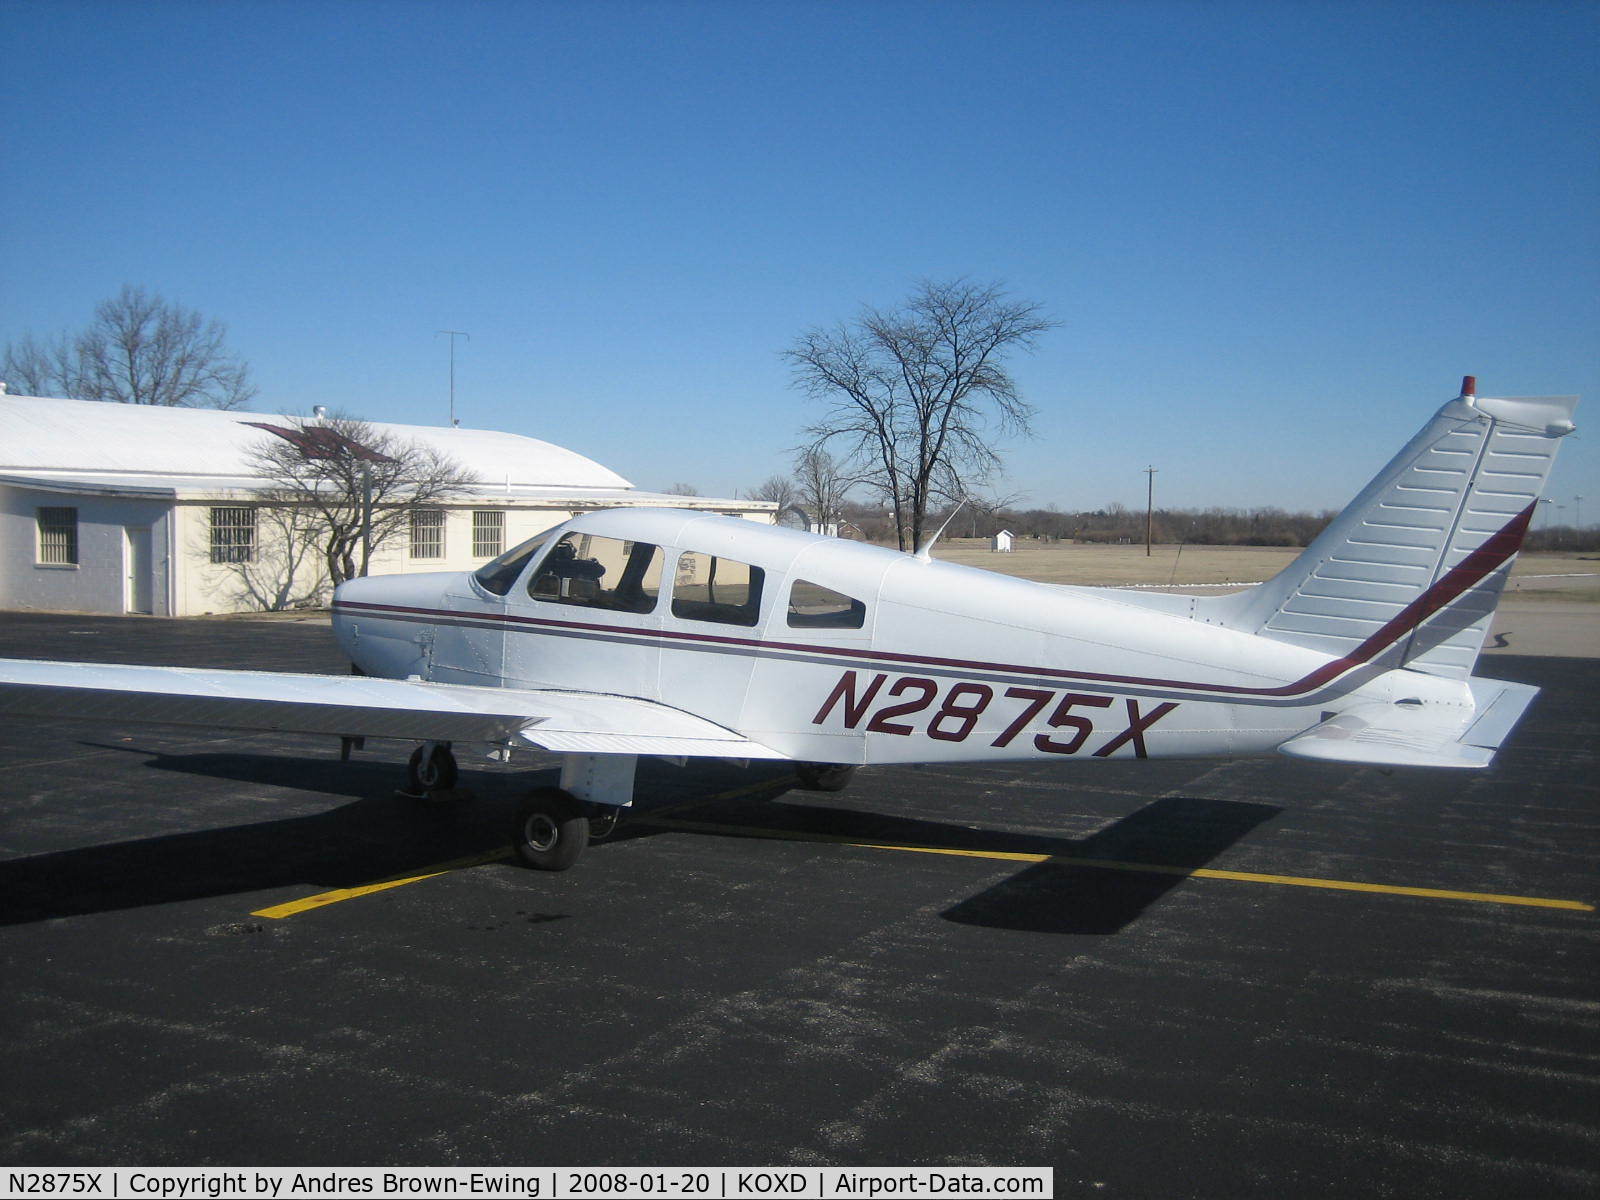 N2875X, 1979 Piper PA-28-161 C/N 28-7916502, parked on our ramp on a frigid day (wind chill of -11 degrees F!)